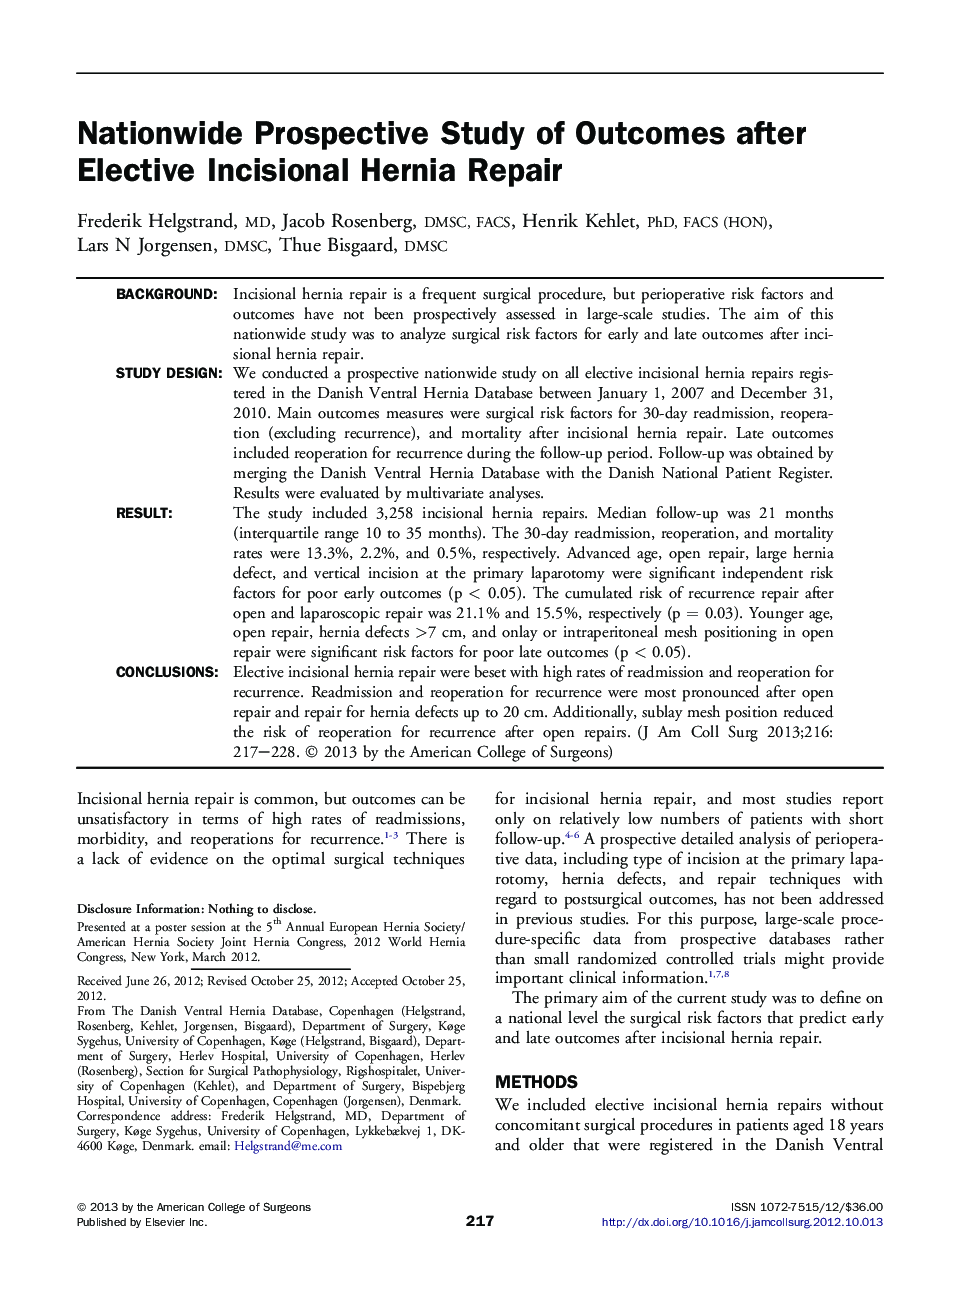 Nationwide Prospective Study of Outcomes after Elective Incisional Hernia Repair 